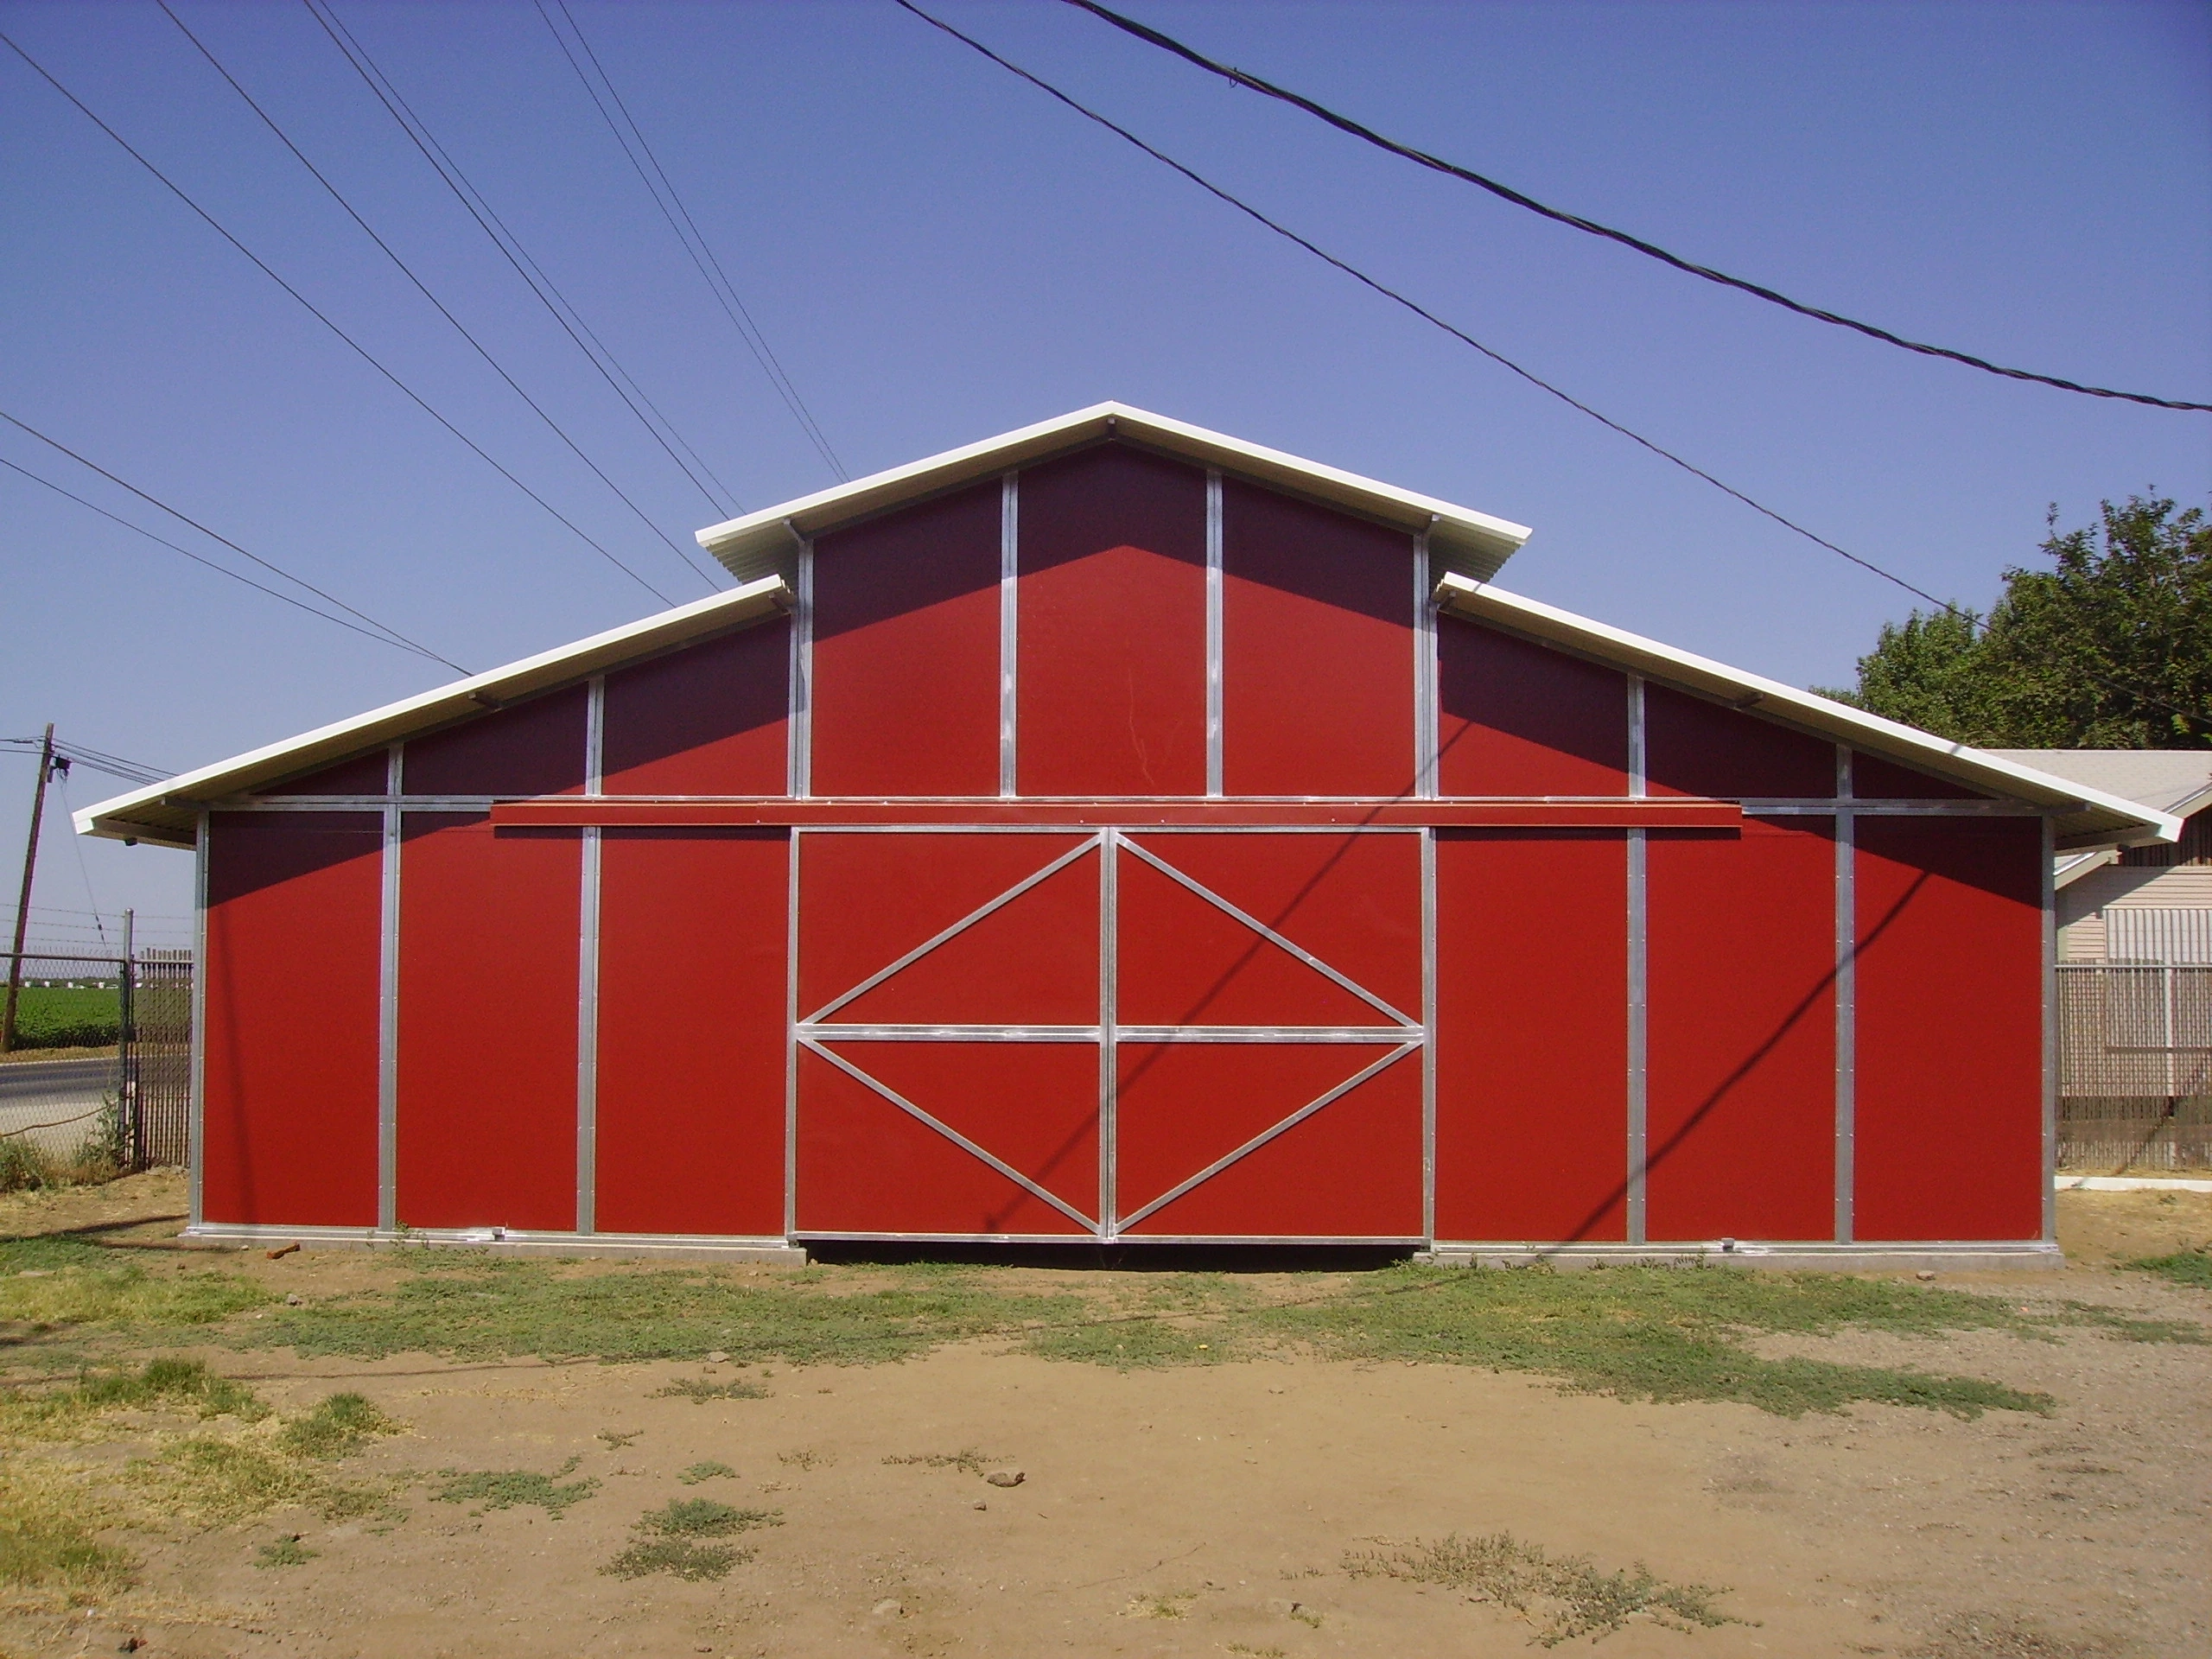 Are Raised Center Aisle Barns the Right Barn Style for Your Space? Check out Now!